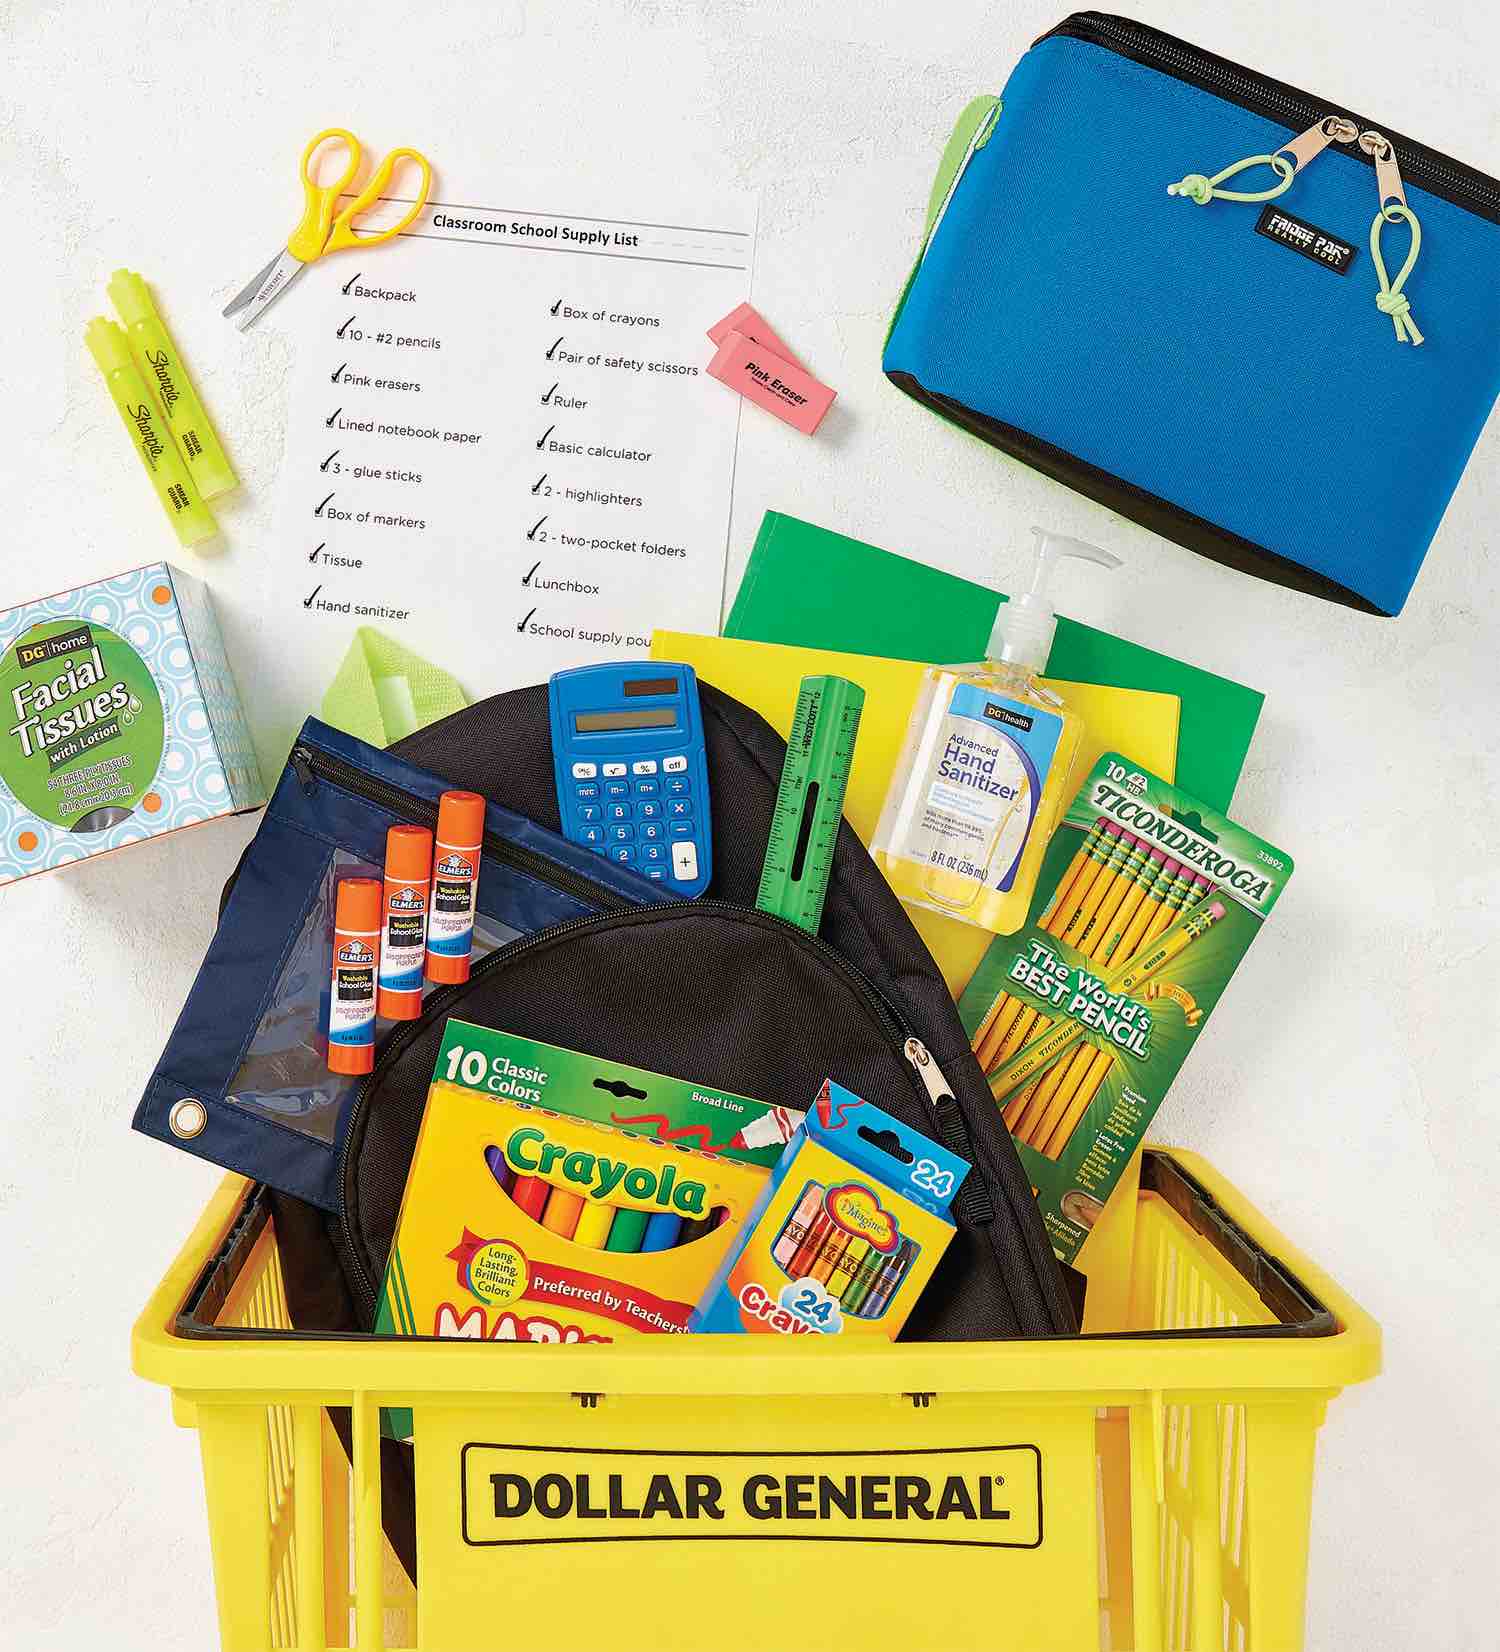 Your Child’s School Supply List At Dollar General